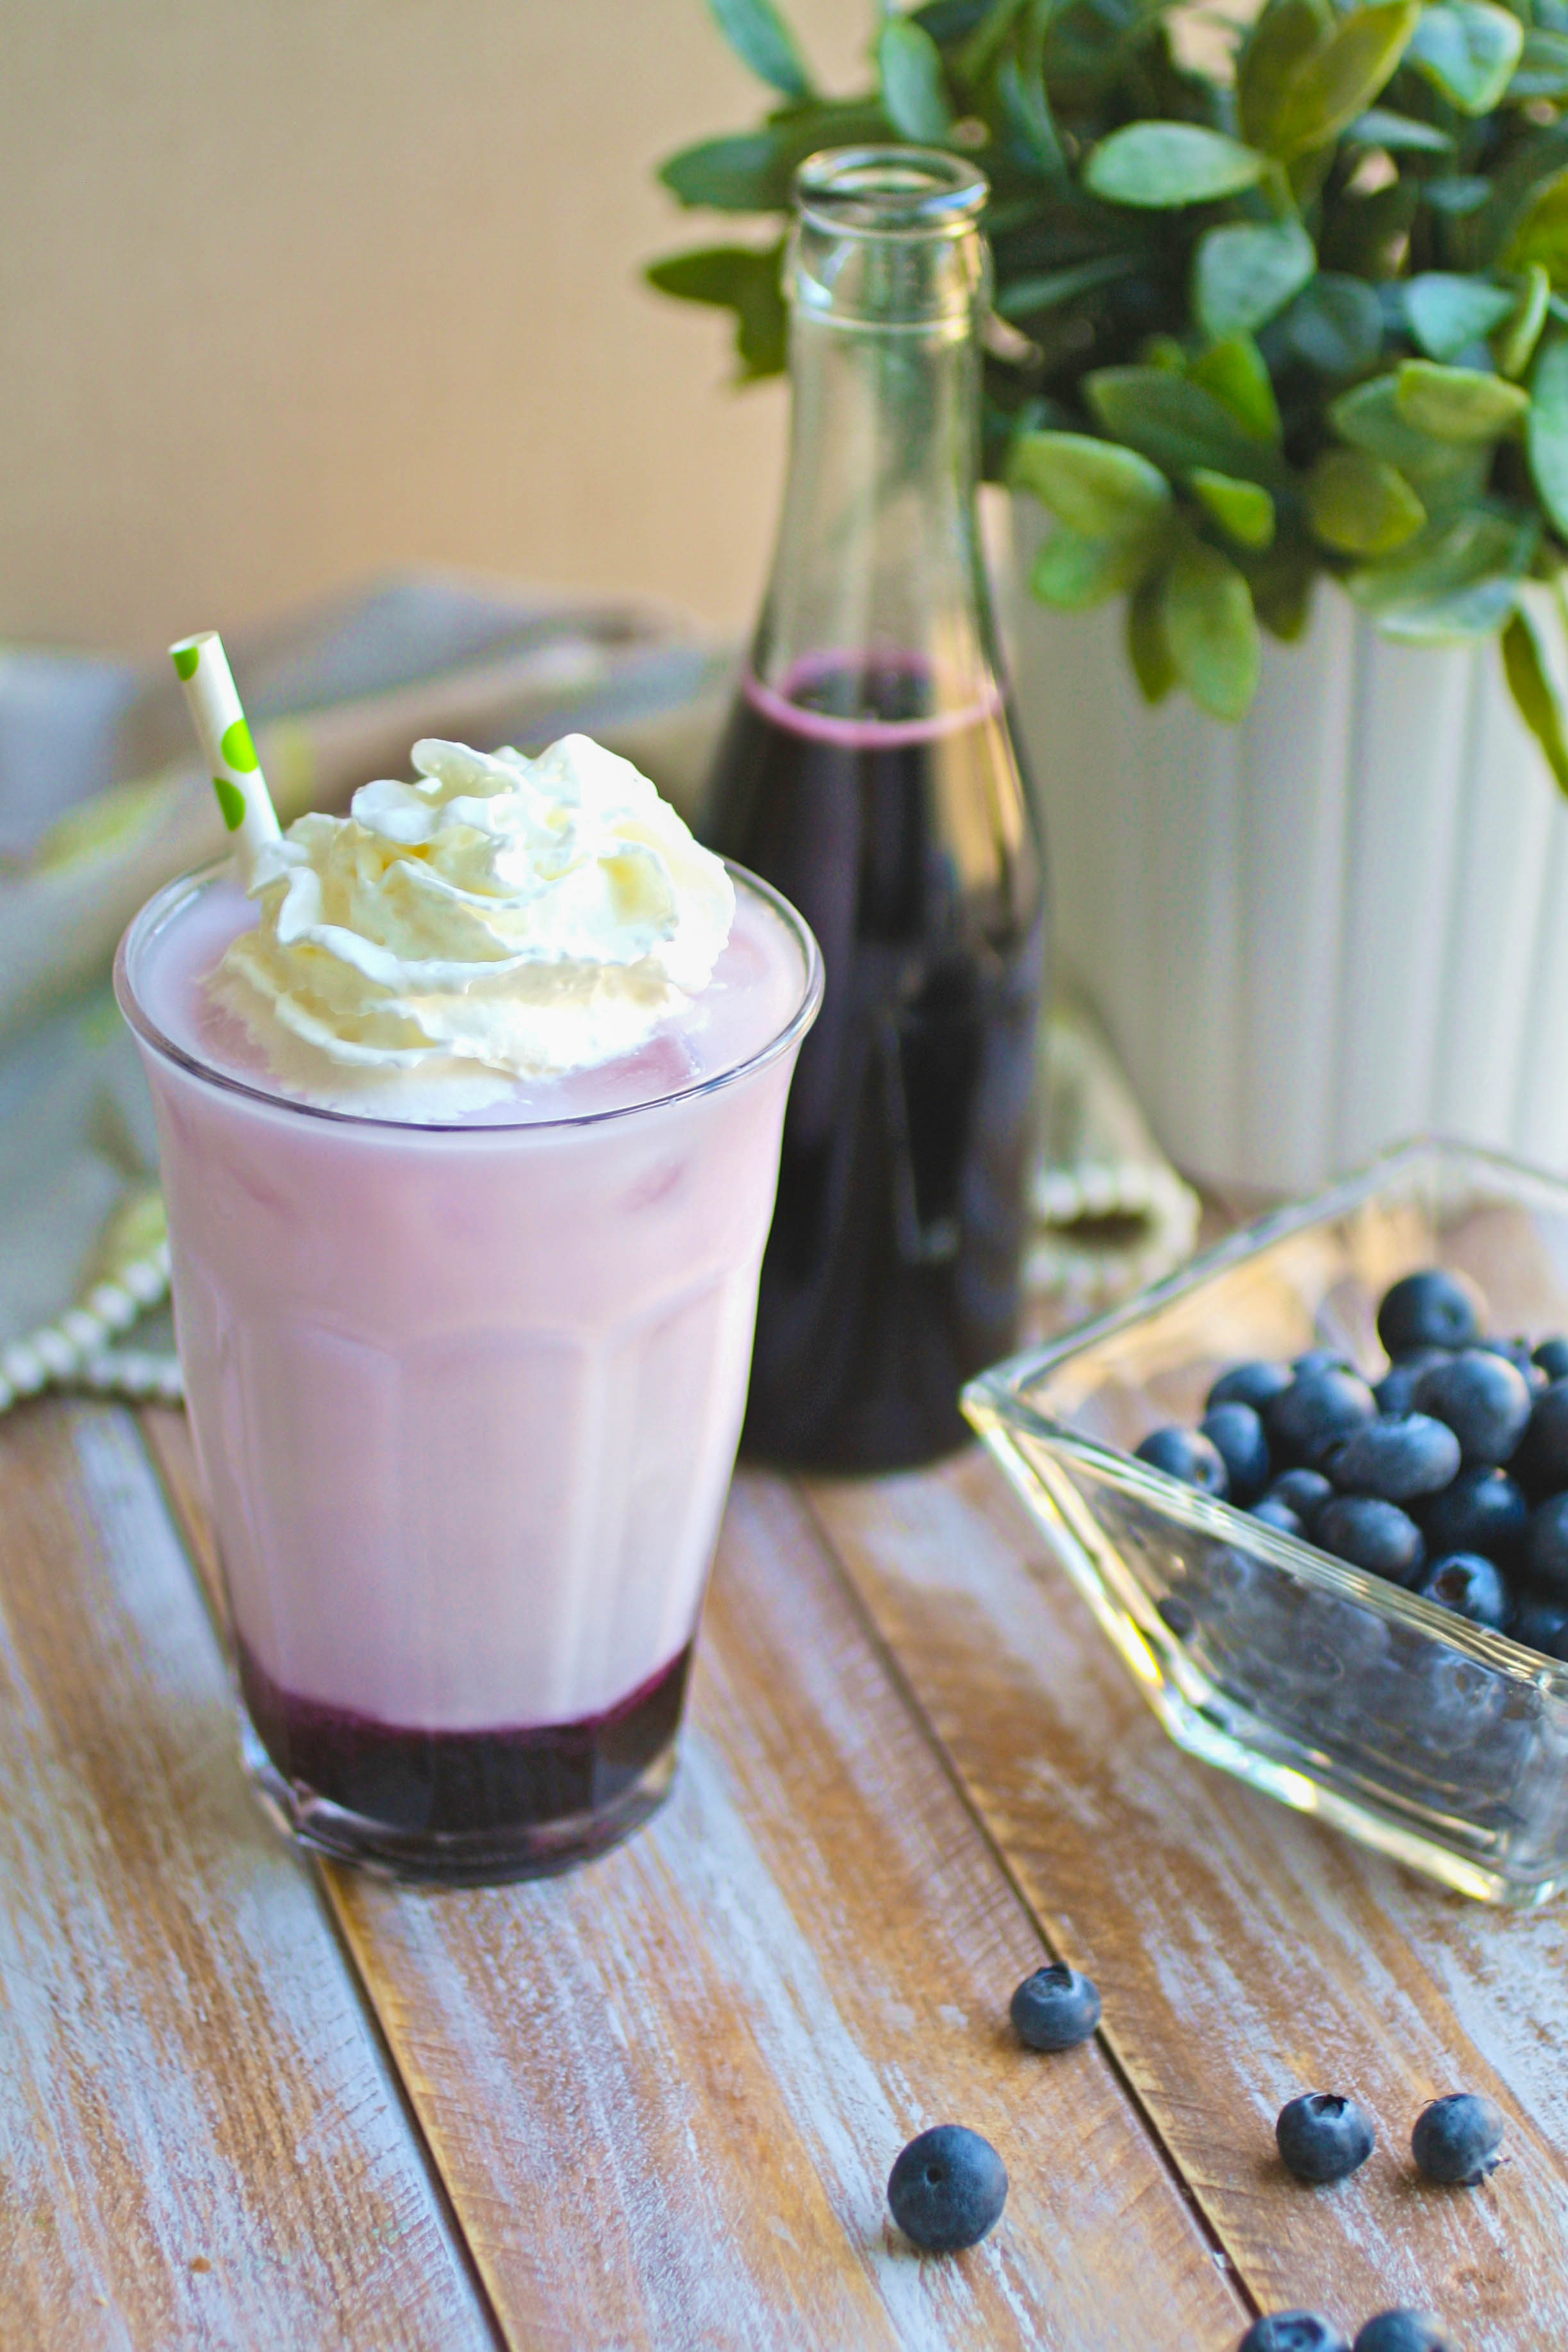 Blueberry Italian Cream Soda drinks are festive and fruity. You'll love these smooth Blueberry Italian Cream Soda drinks!